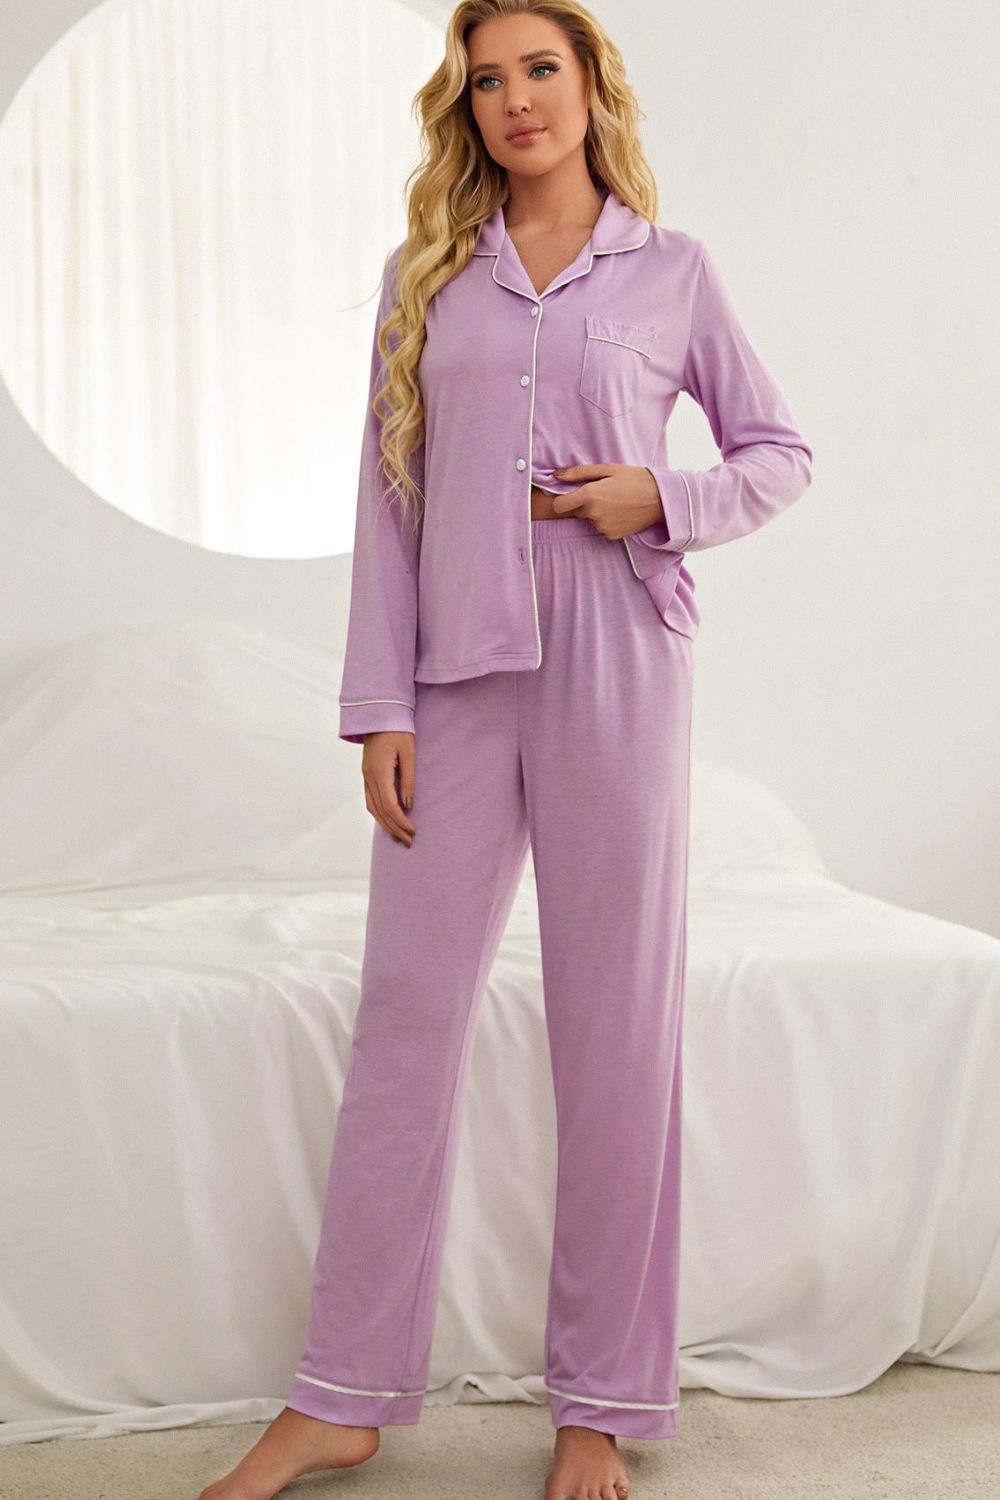 Contrast Piping Button Down Top and Pants Loungewear Set - Fashion Girl Online Store